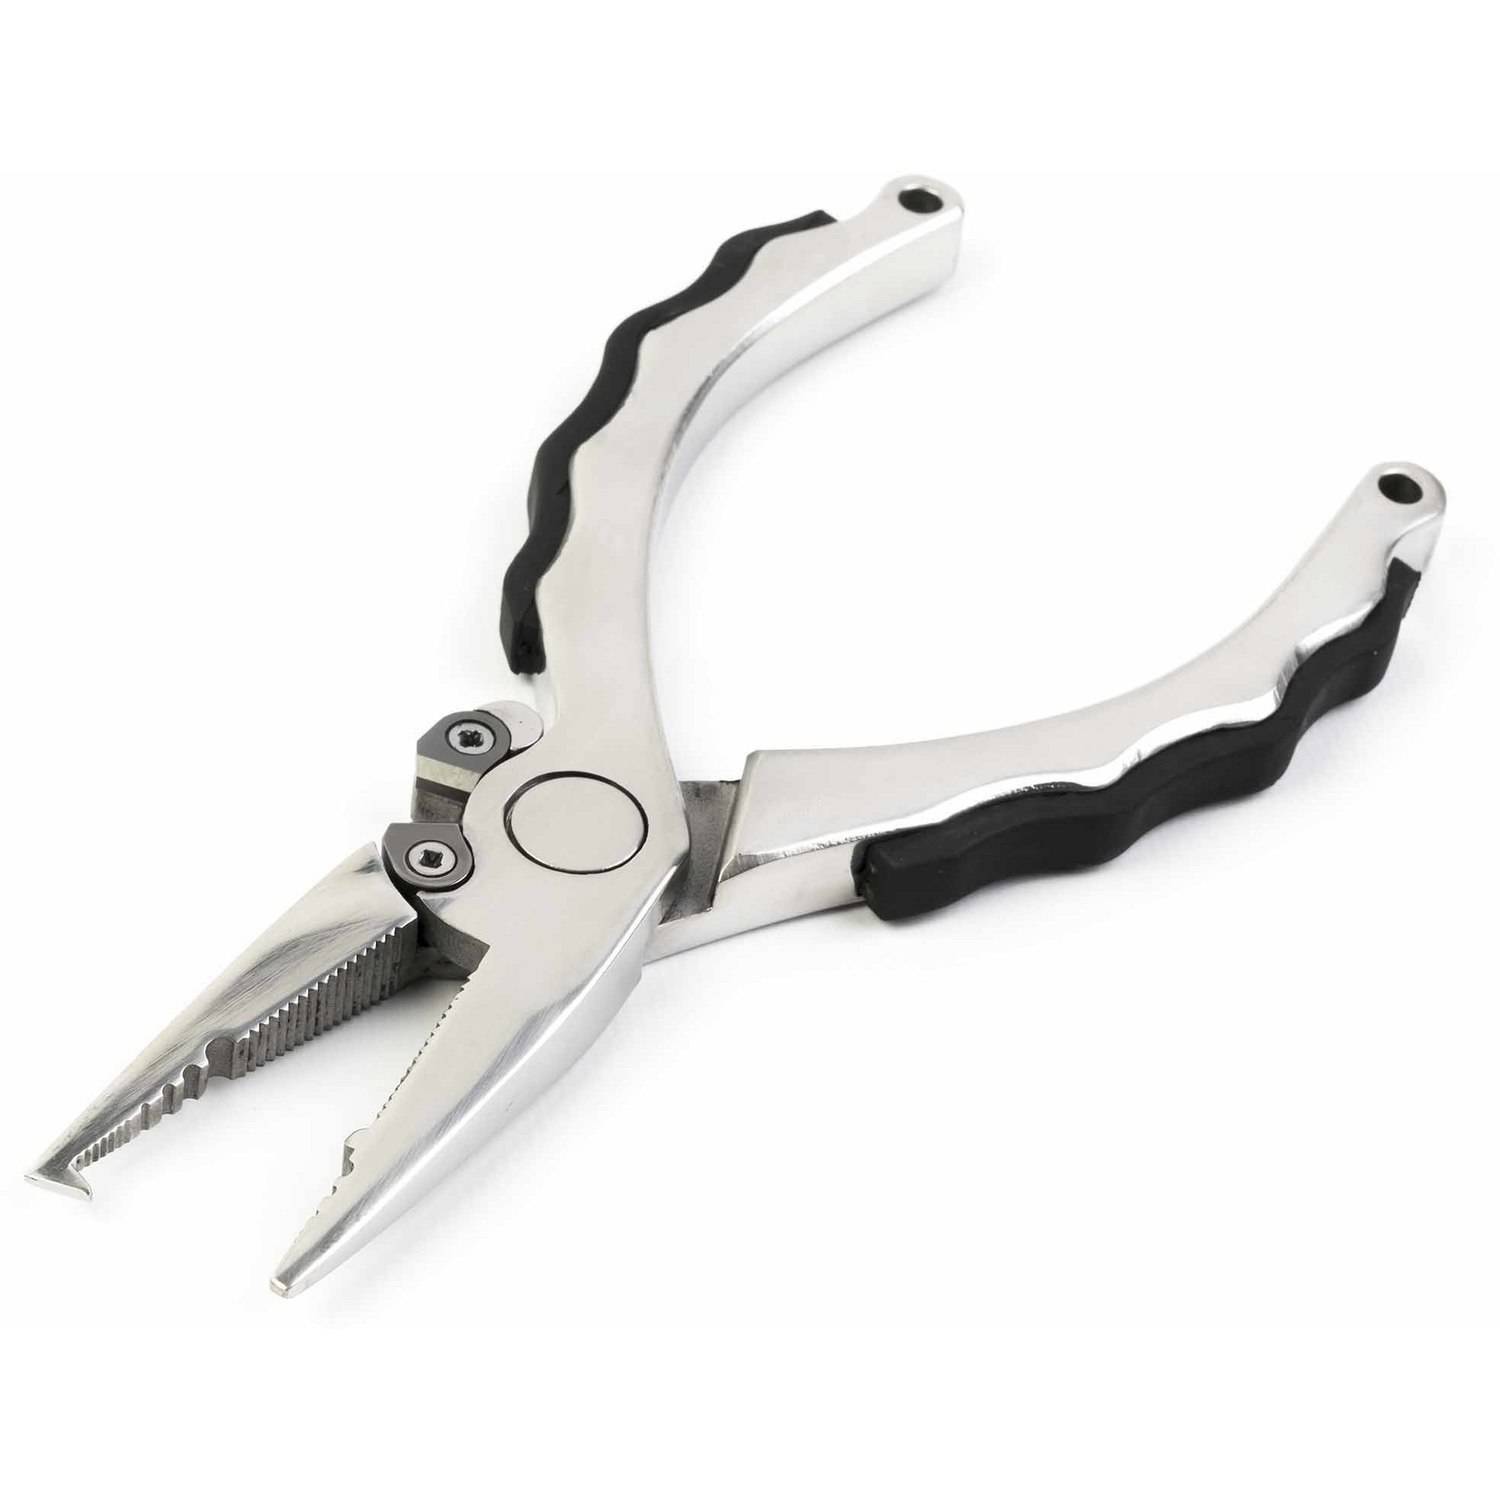 Ozark Trail 8-Inch Stainless Steel Pliers with Sheath - image 3 of 3